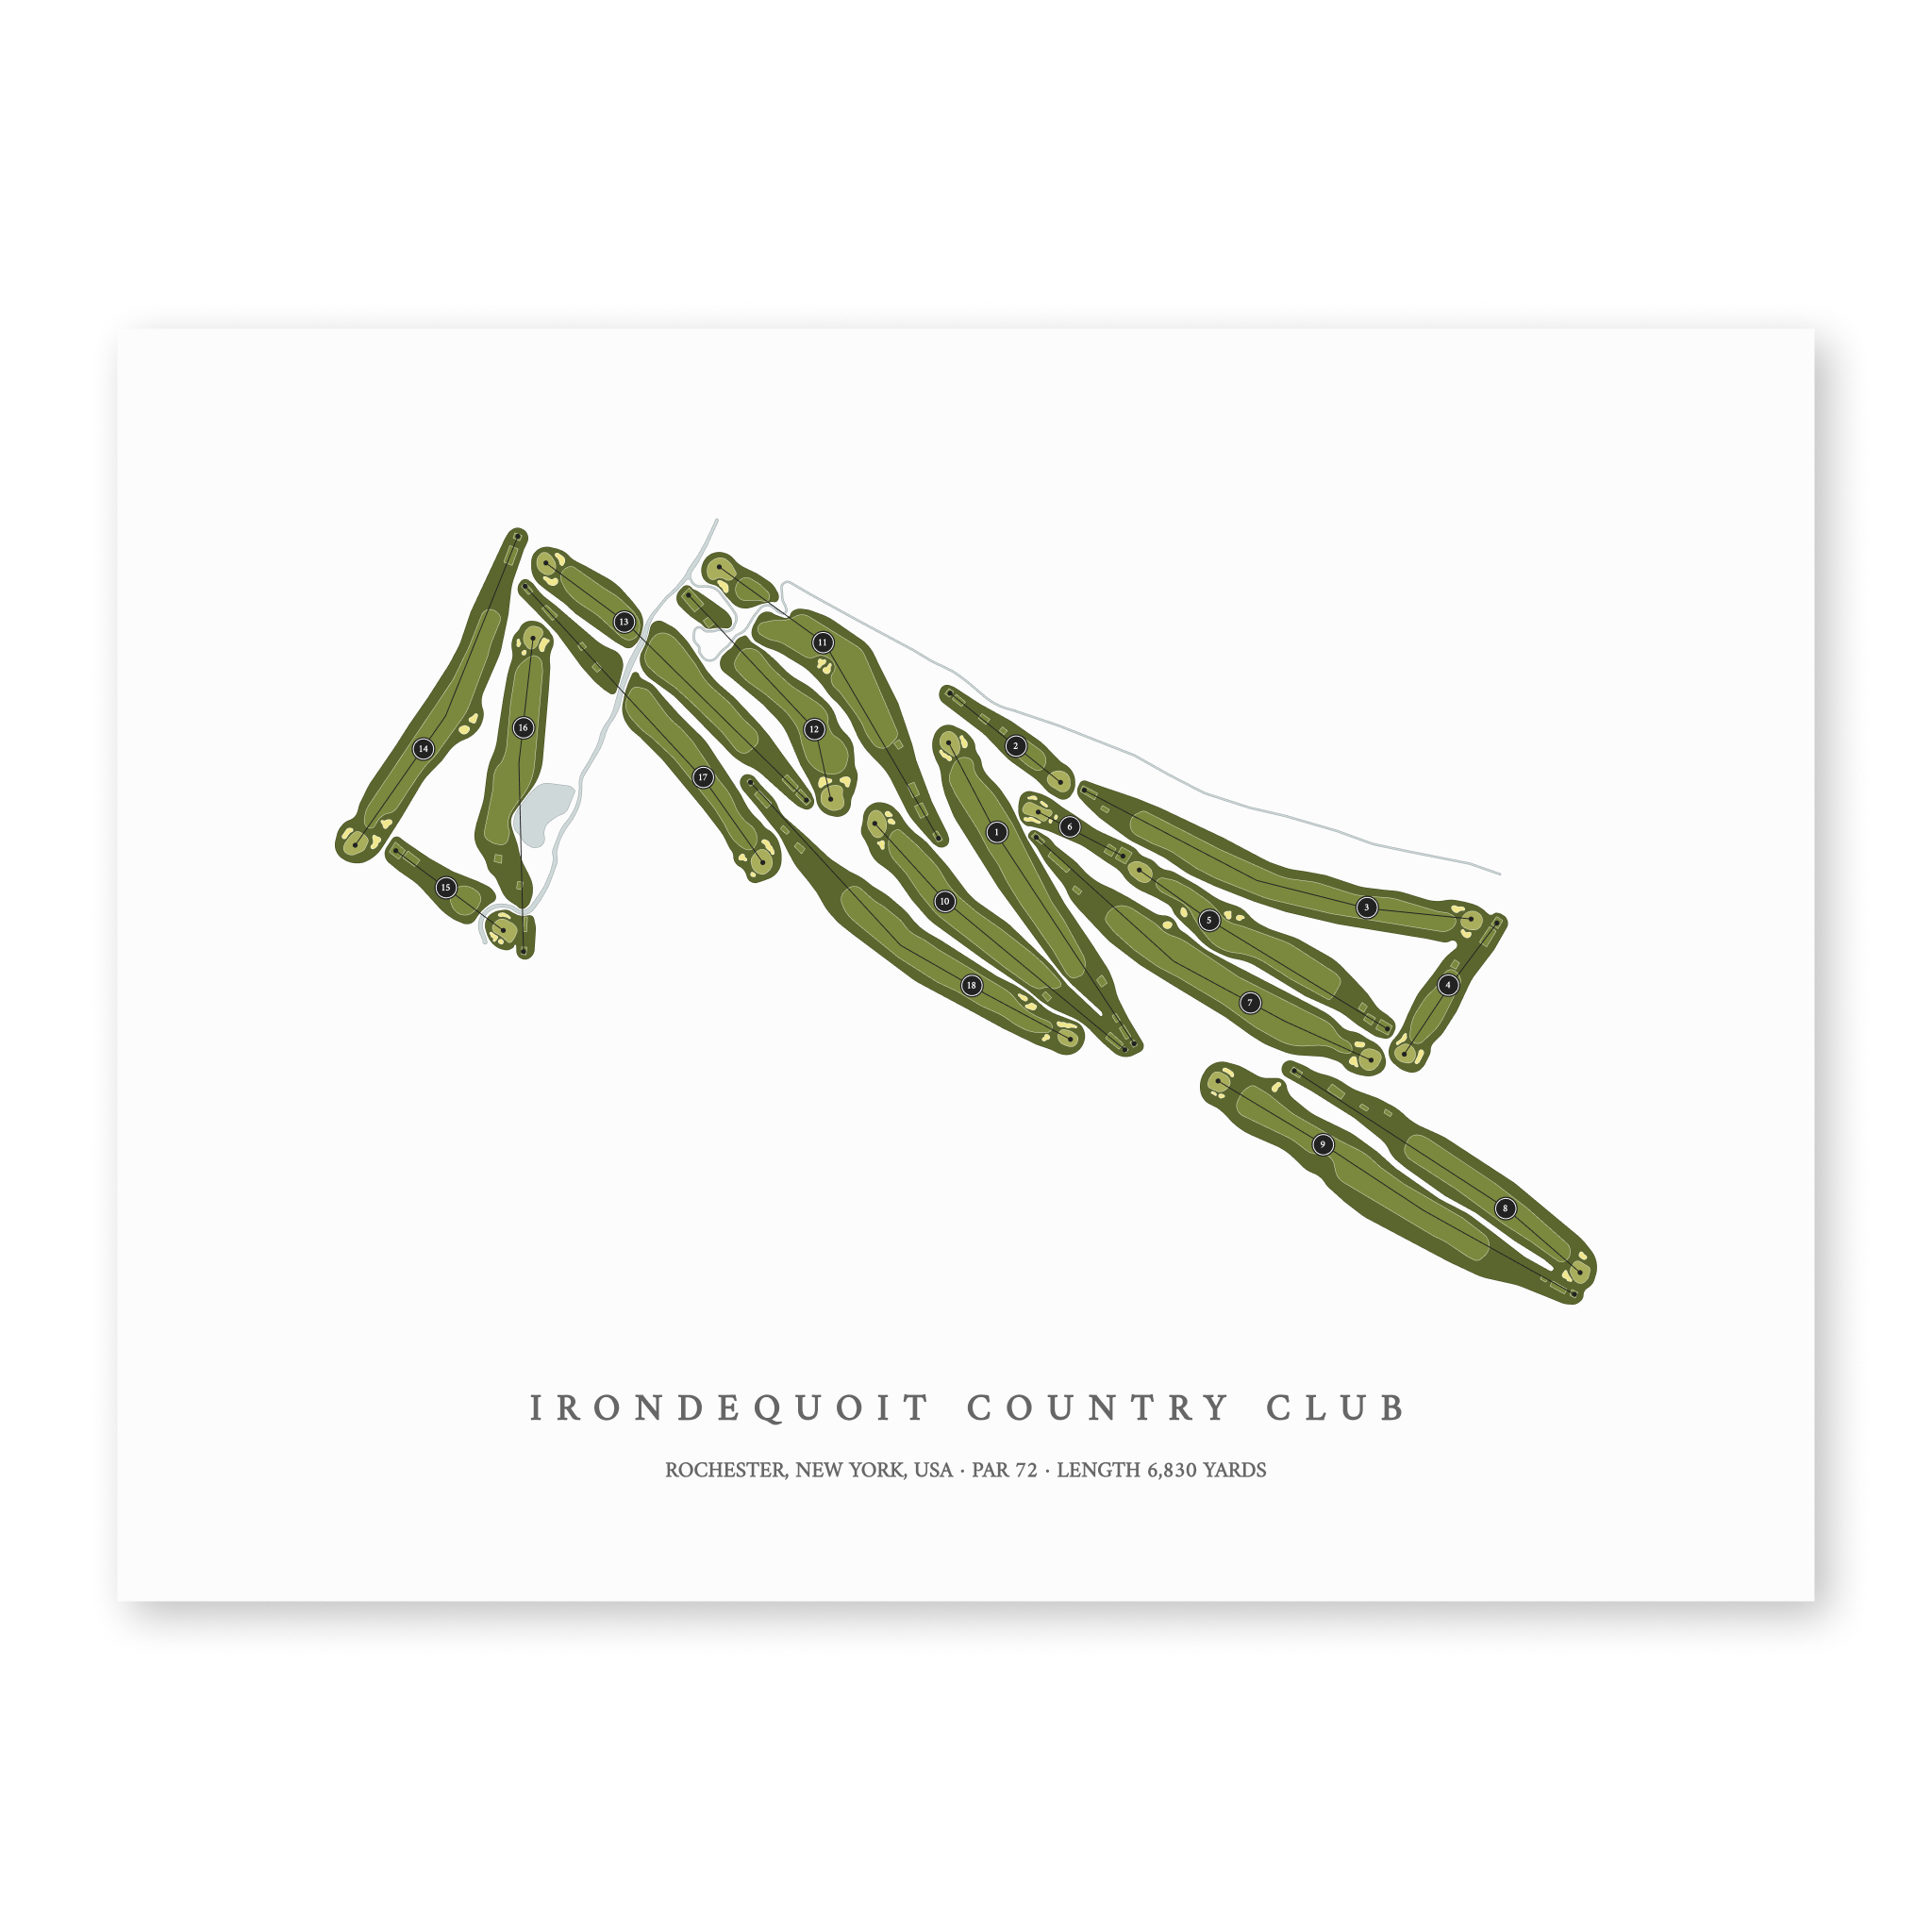 Irondequoit Country Club| Golf Course Print | Unframed With Hole Numbers #hole numbers_yes